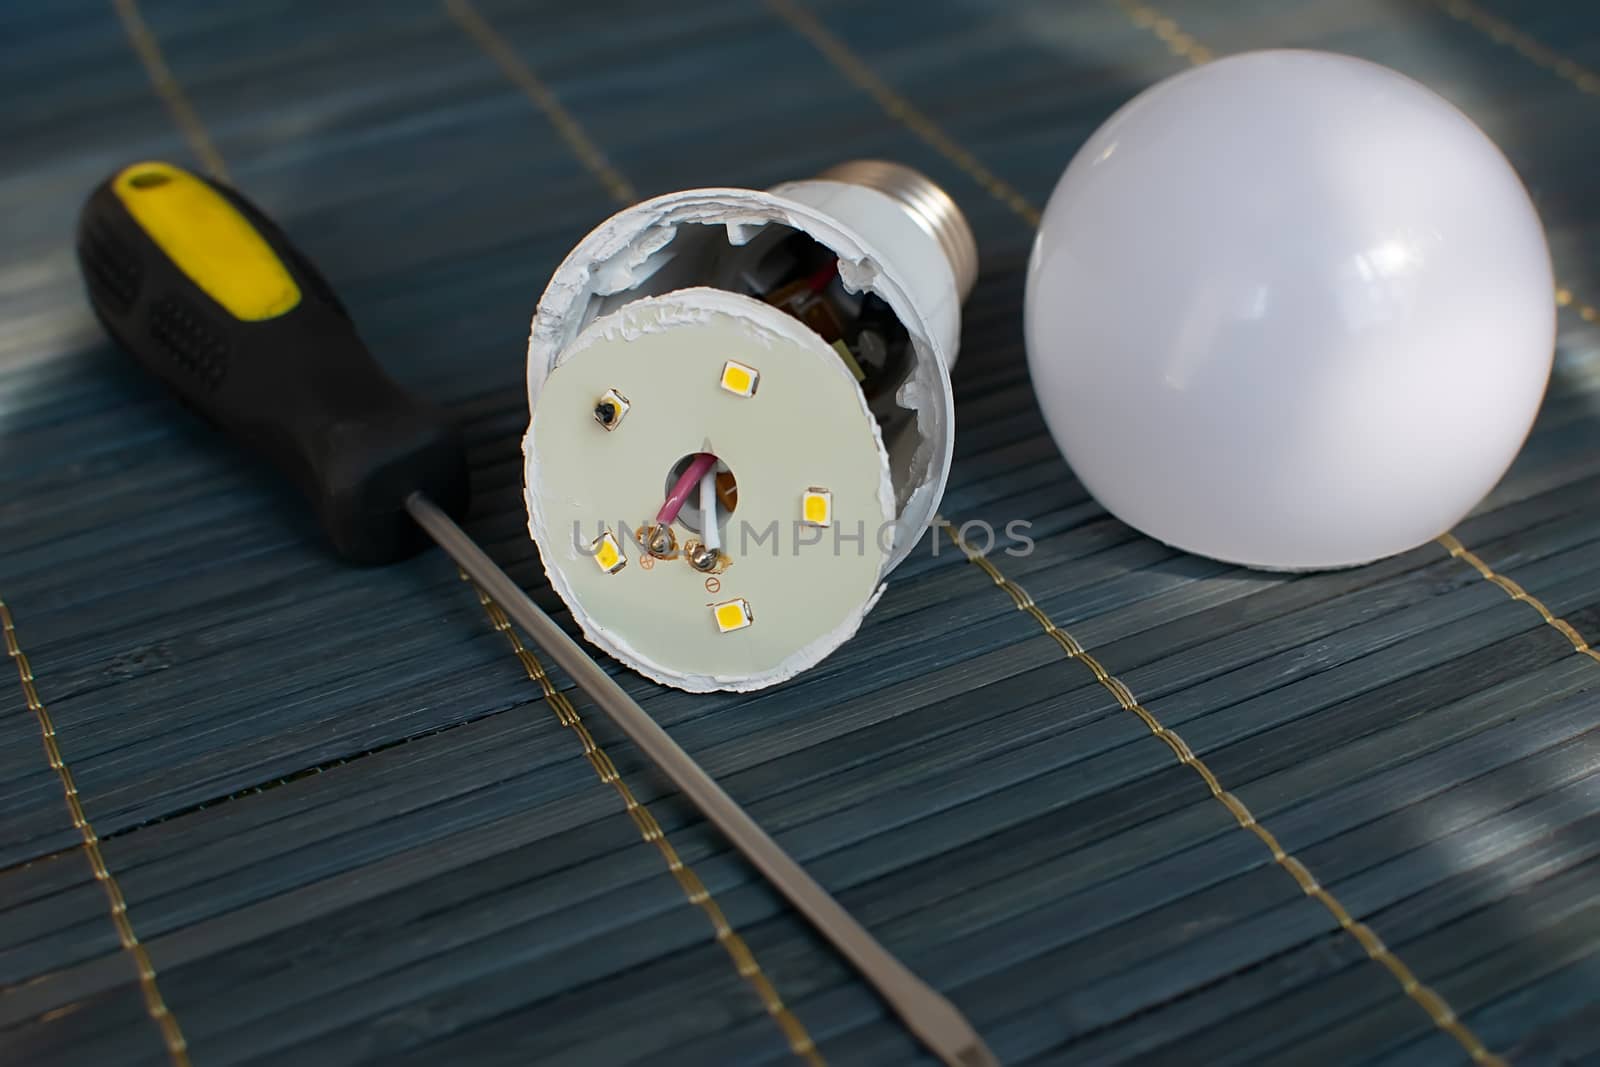 faulty, disassembled led household lamp with a burnt led element is on the table next to the screwdriver